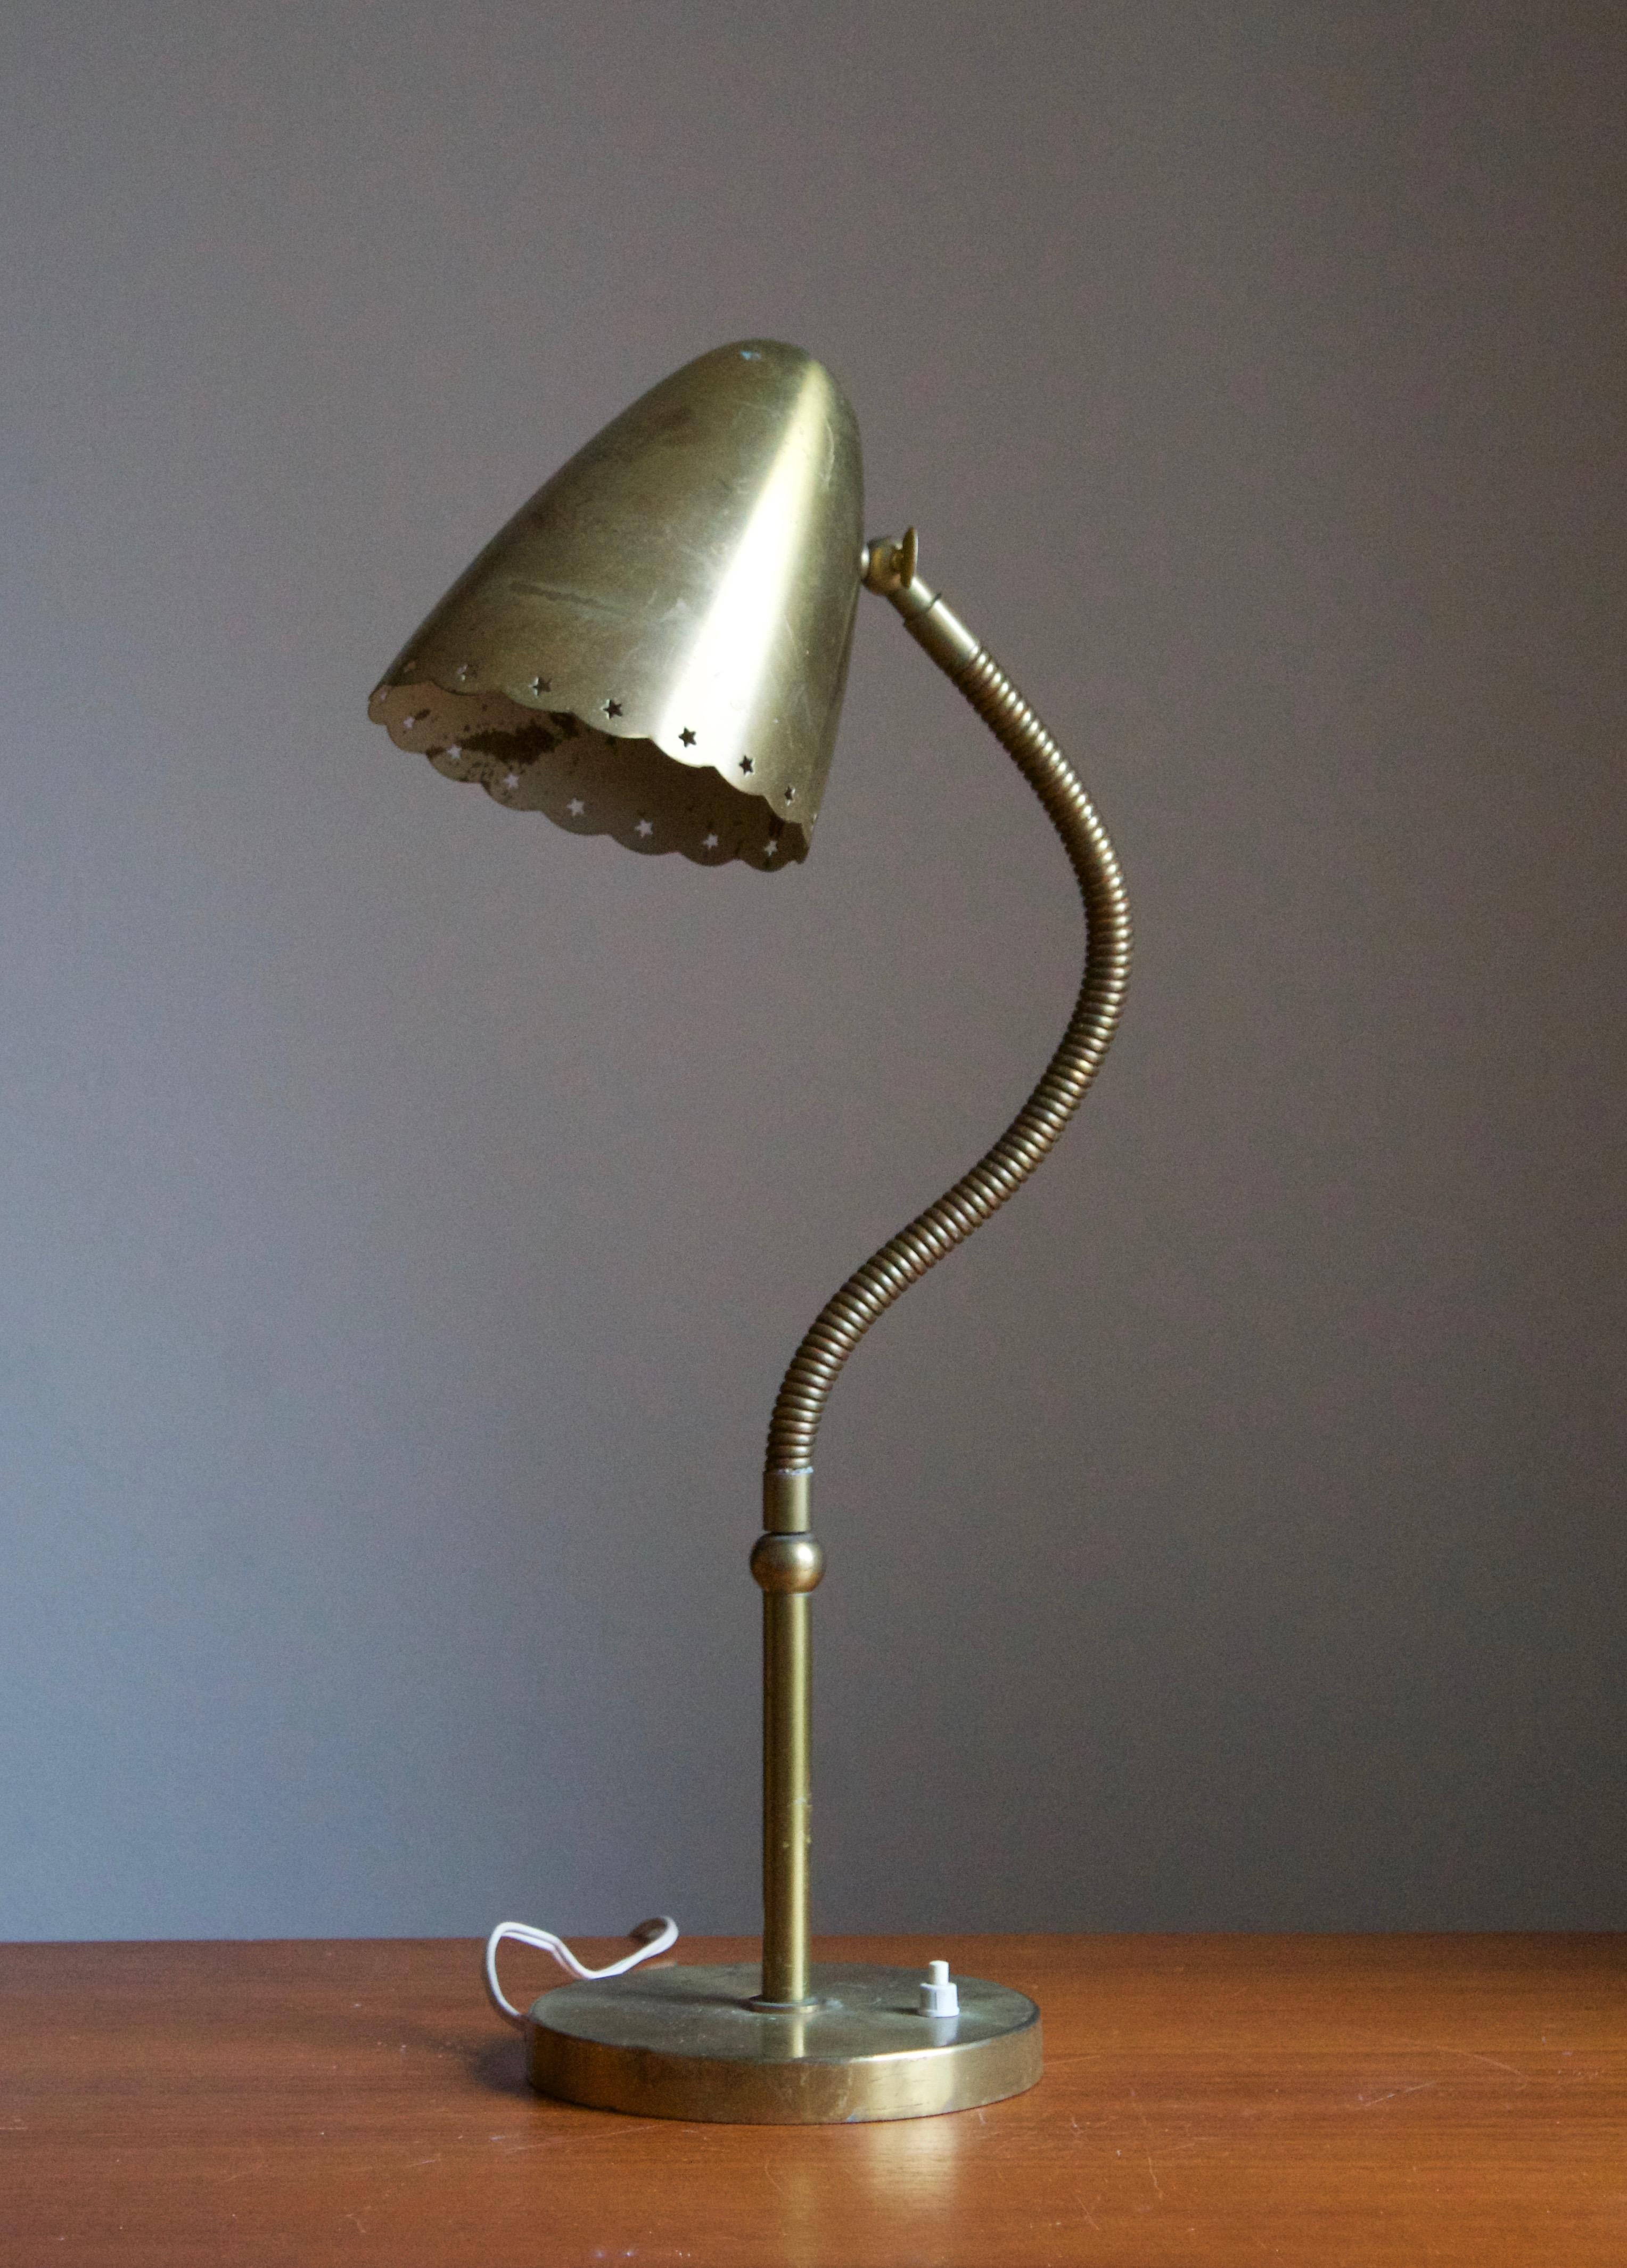 A sizable desk light / table lamp. Design attributed Vilhelm Lauritzen and Frits Schlegel. Production attributed to Fritzsches Glashandel, Denmark, 1940s

Please compare form and hardware to other examples attributed to Lauritzen & Schlegel.